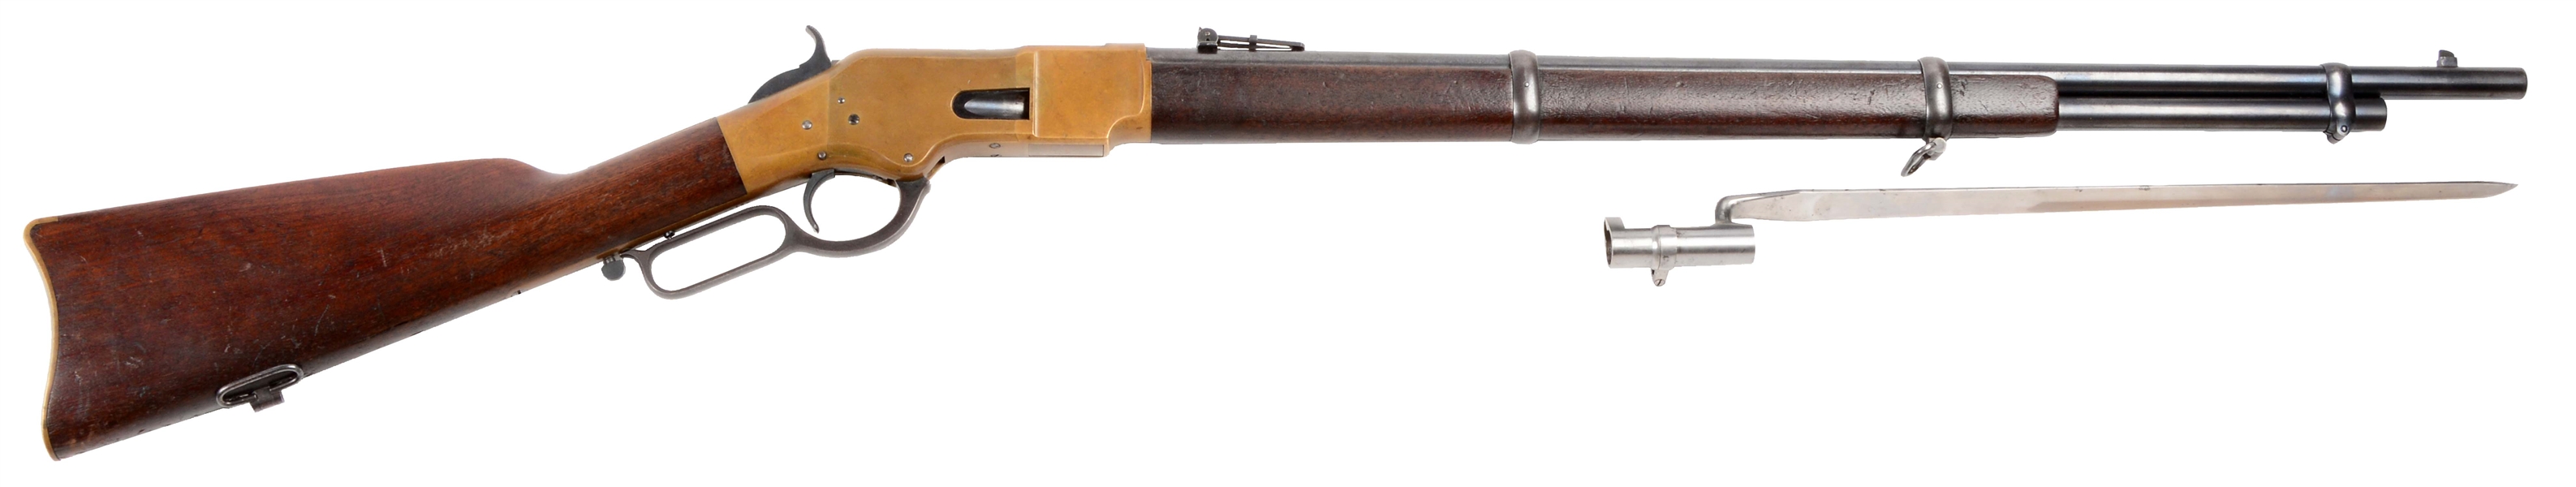 (A) WINCHESTER MODEL 1866 LEVER ACTION MUSKET WITH BAYONET.